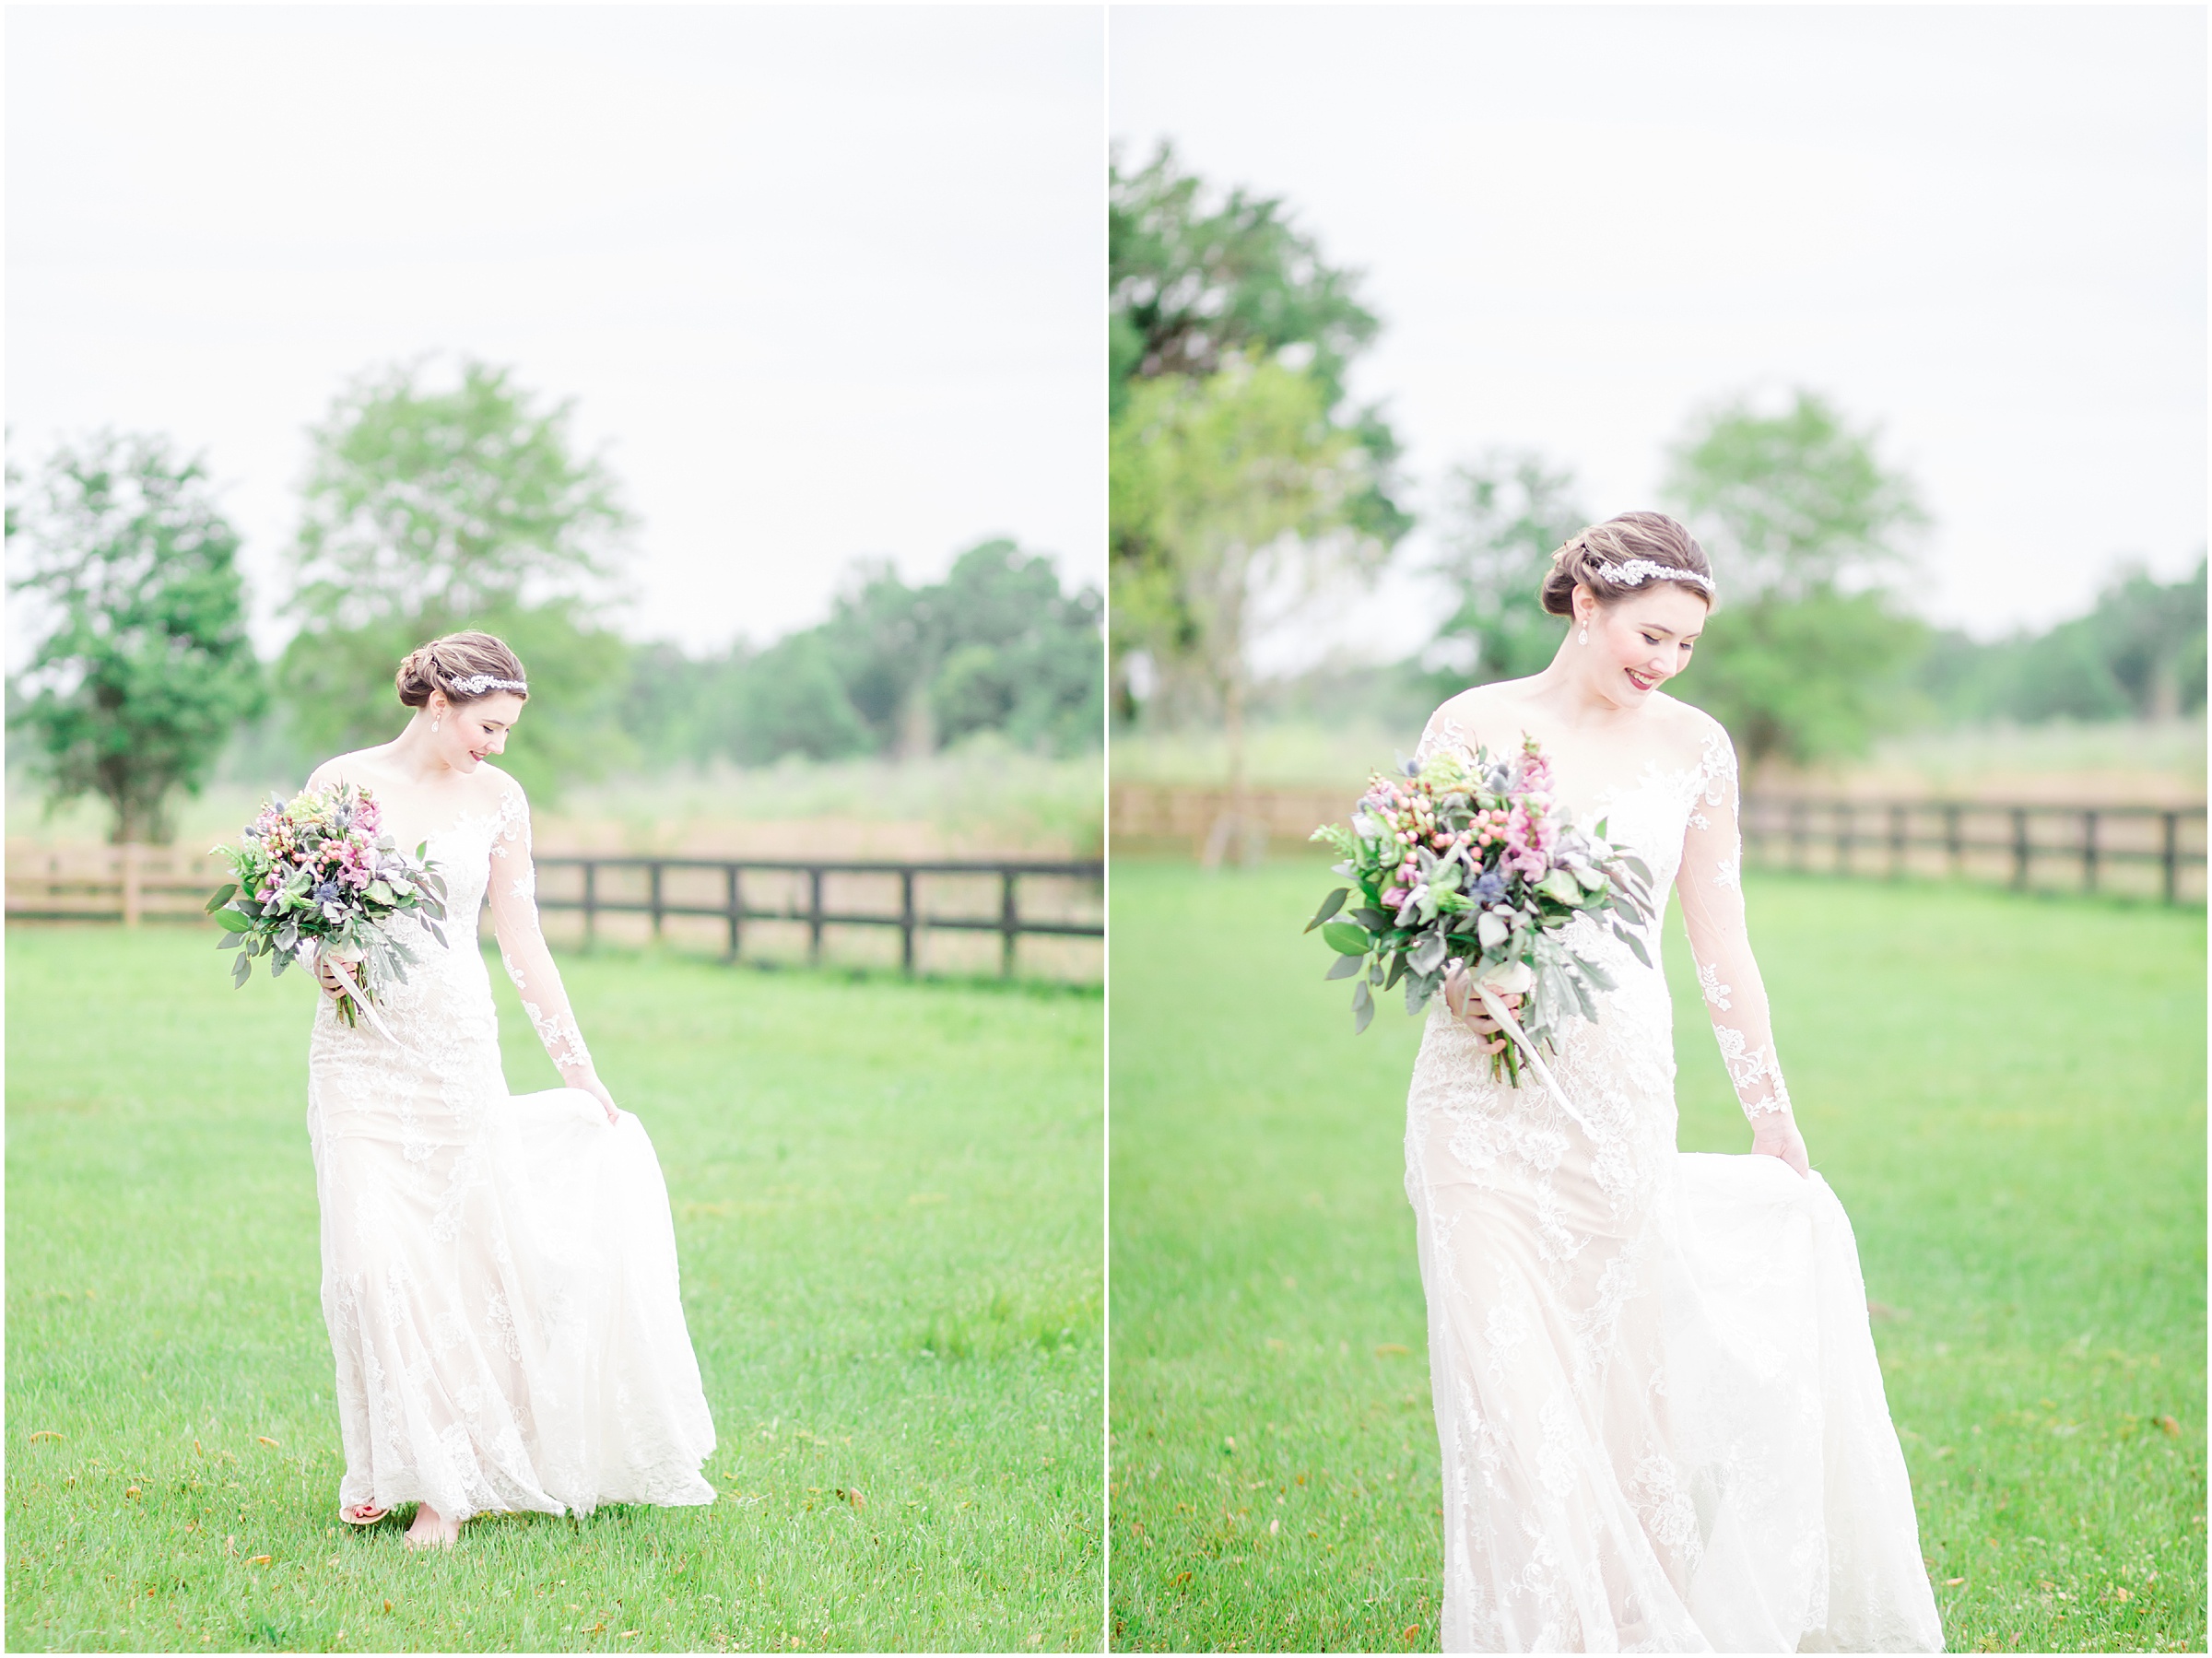 Styled Wedding Shoot at Covington Farms Wedding & Events in Dade City, FL.